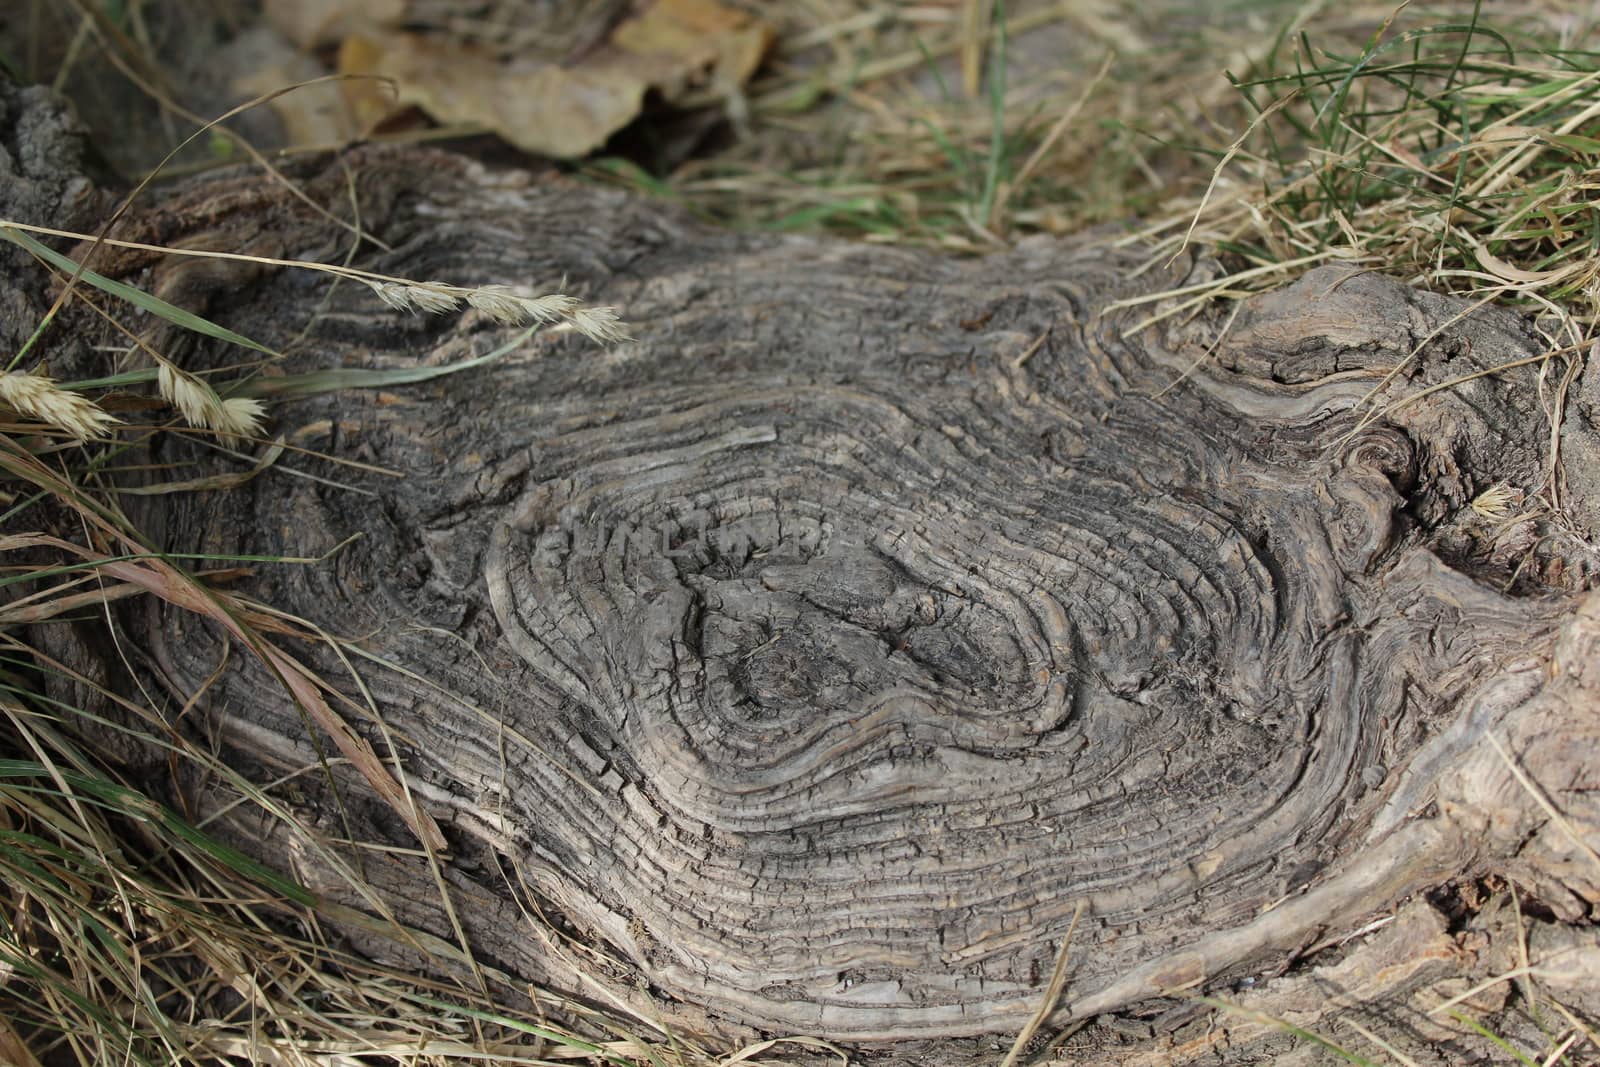 Details of above ground root of an old tree.